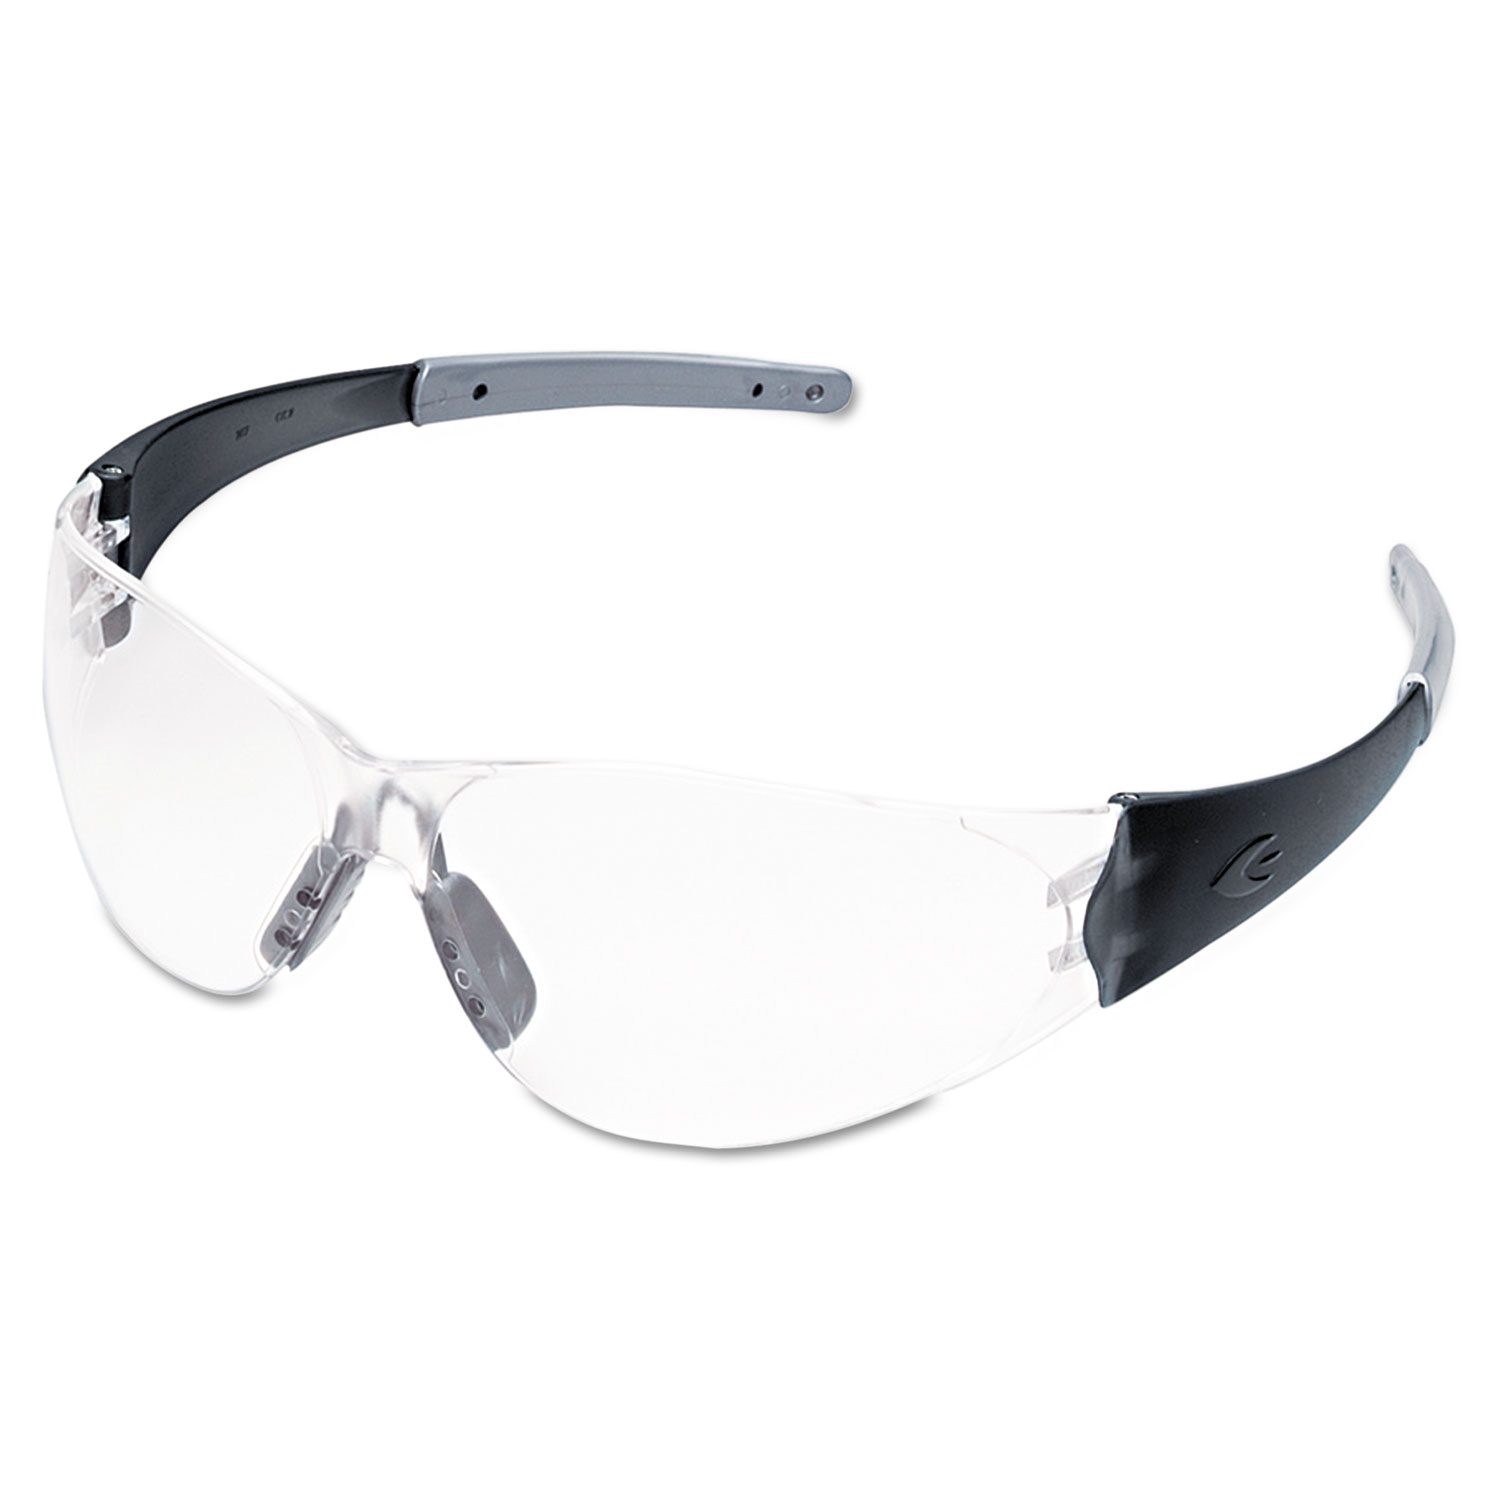 CK2 Series Safety Glasses, Clear Lens, Anti-Fog